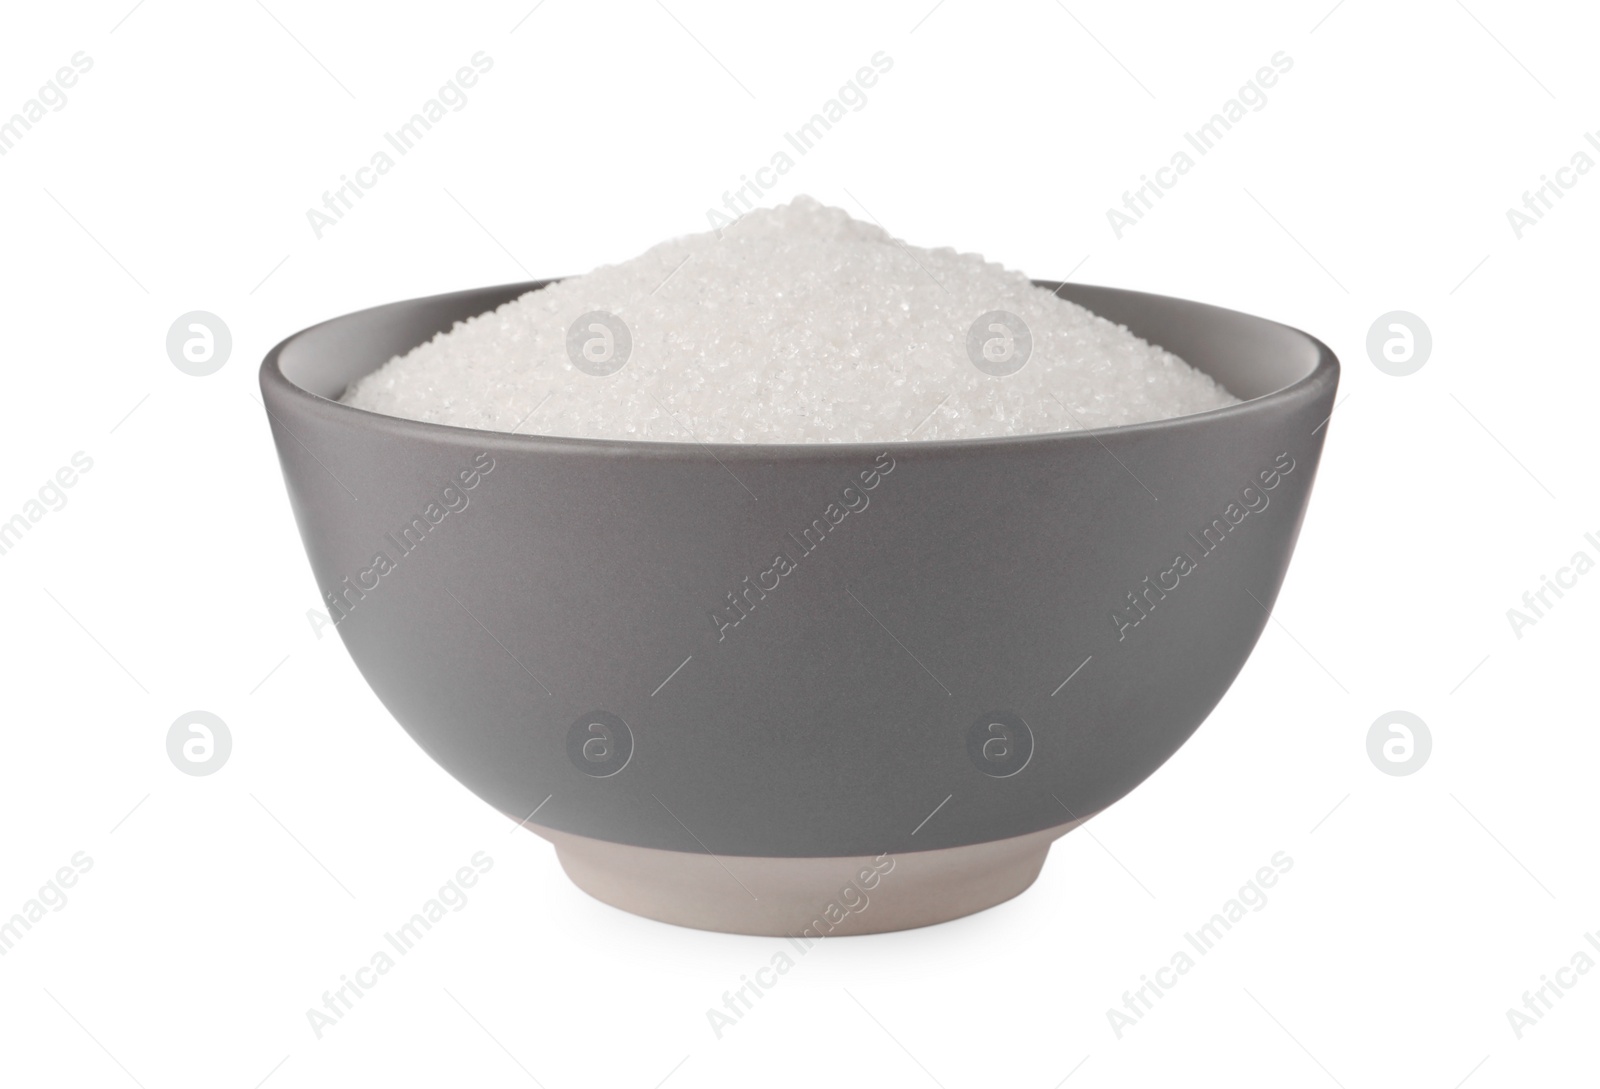 Photo of Bowl of granulated sugar isolated on white